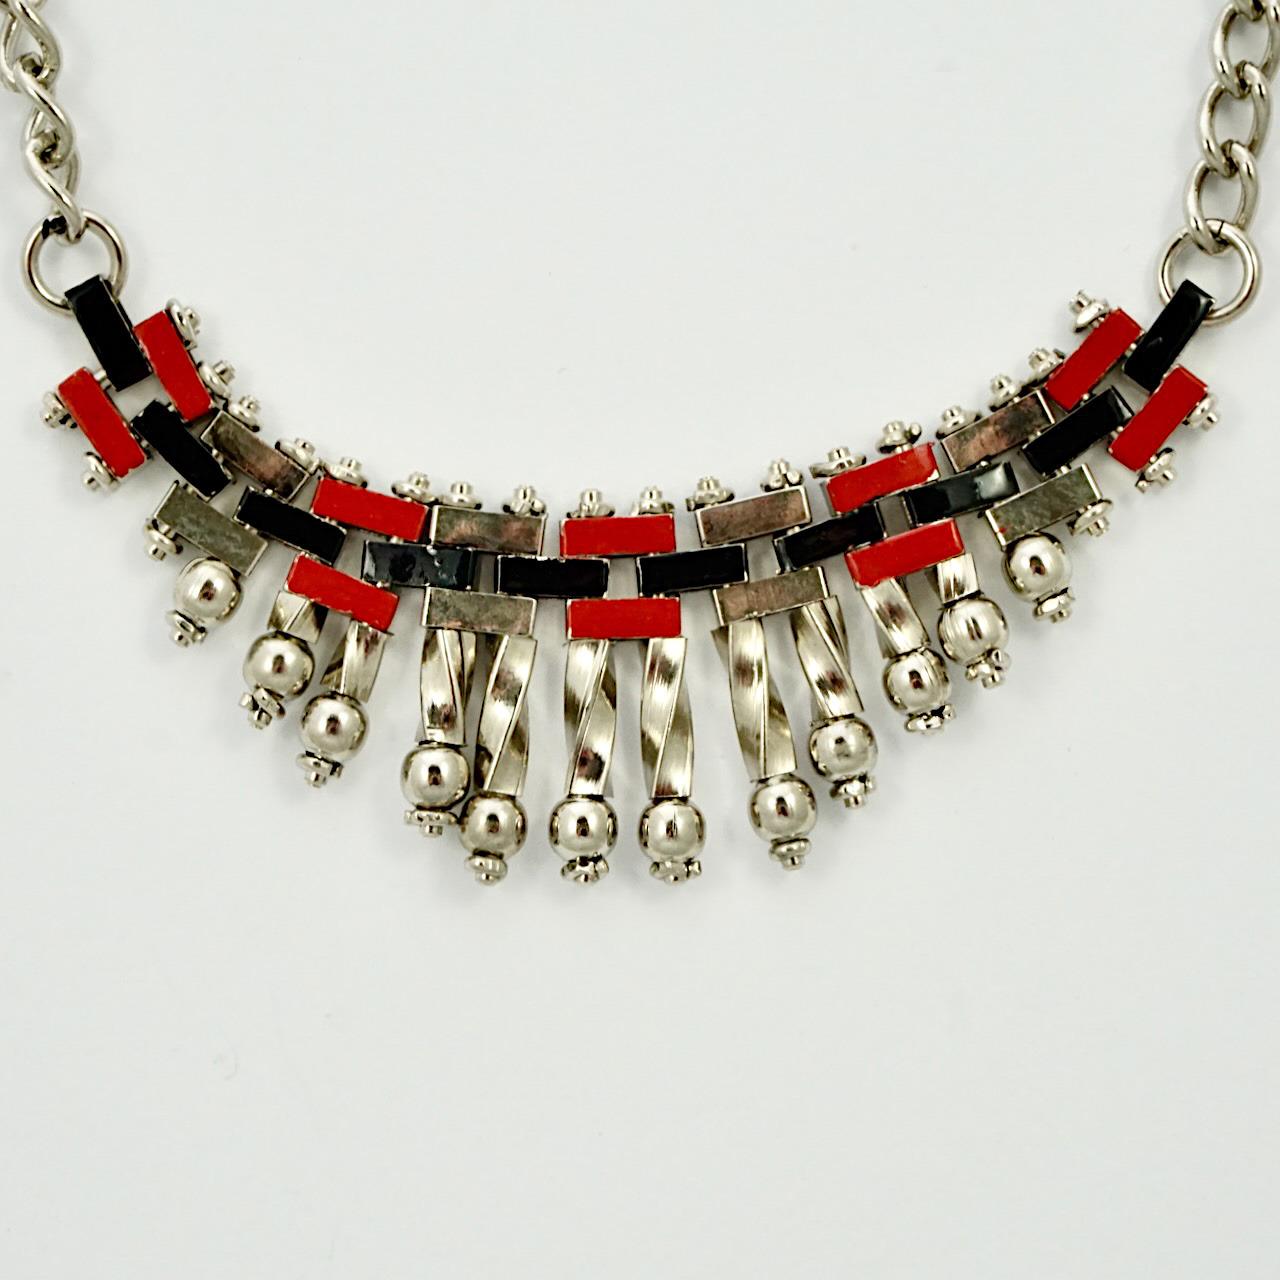 Wonderful Jakob Bengel Art Deco chrome plated necklace, featuring red and black enamel painted brickwork links, and a twist and ball design. Measuring length 40.6 cm / 16 inches and the centrepiece is width 8.4 cm / 3.3 inches by drop 2.4 cm / .94